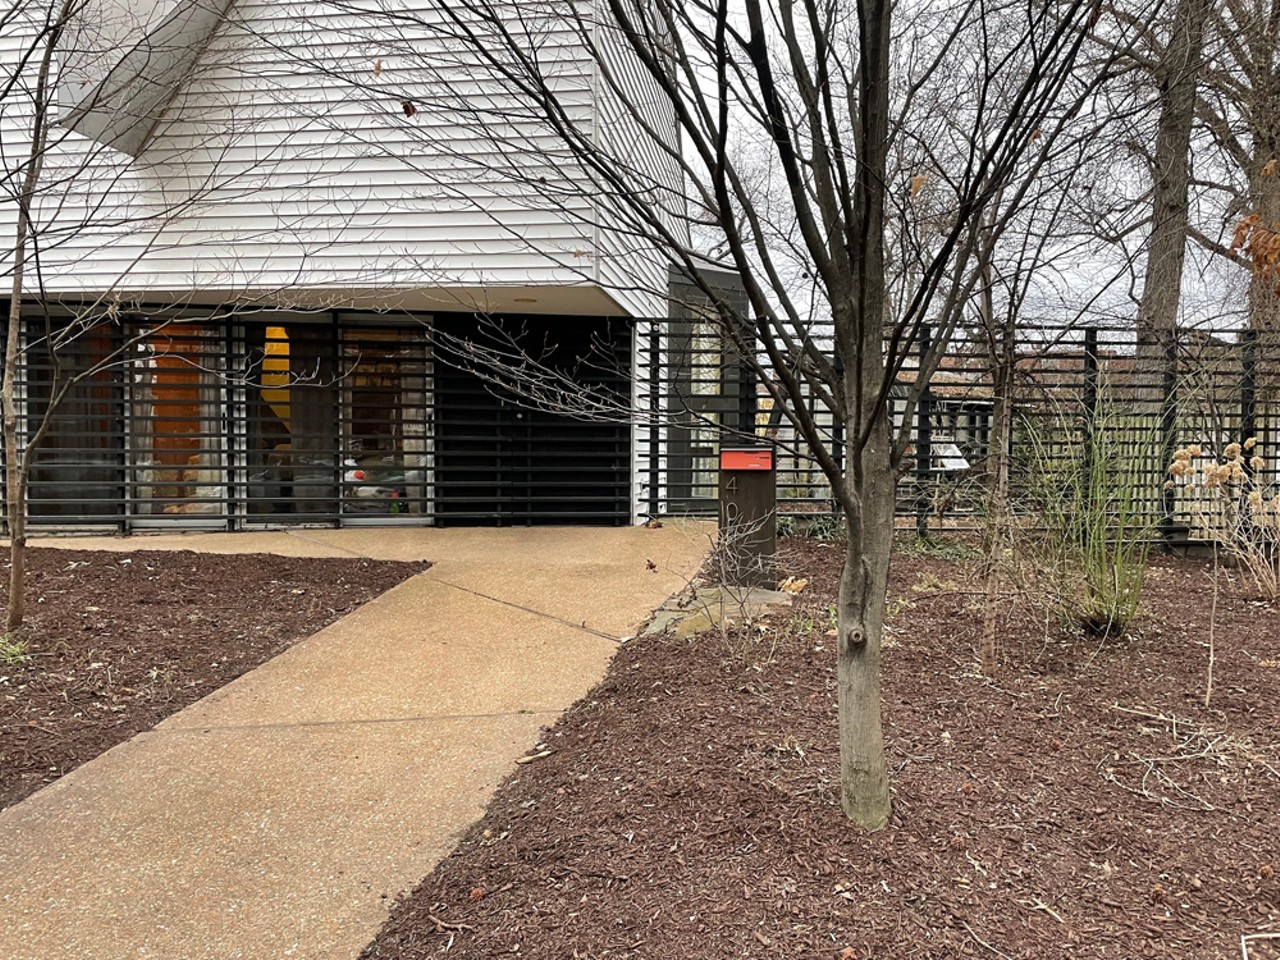 This Contemporary House Is a Tower Grove South Landmark [PHOTOS]